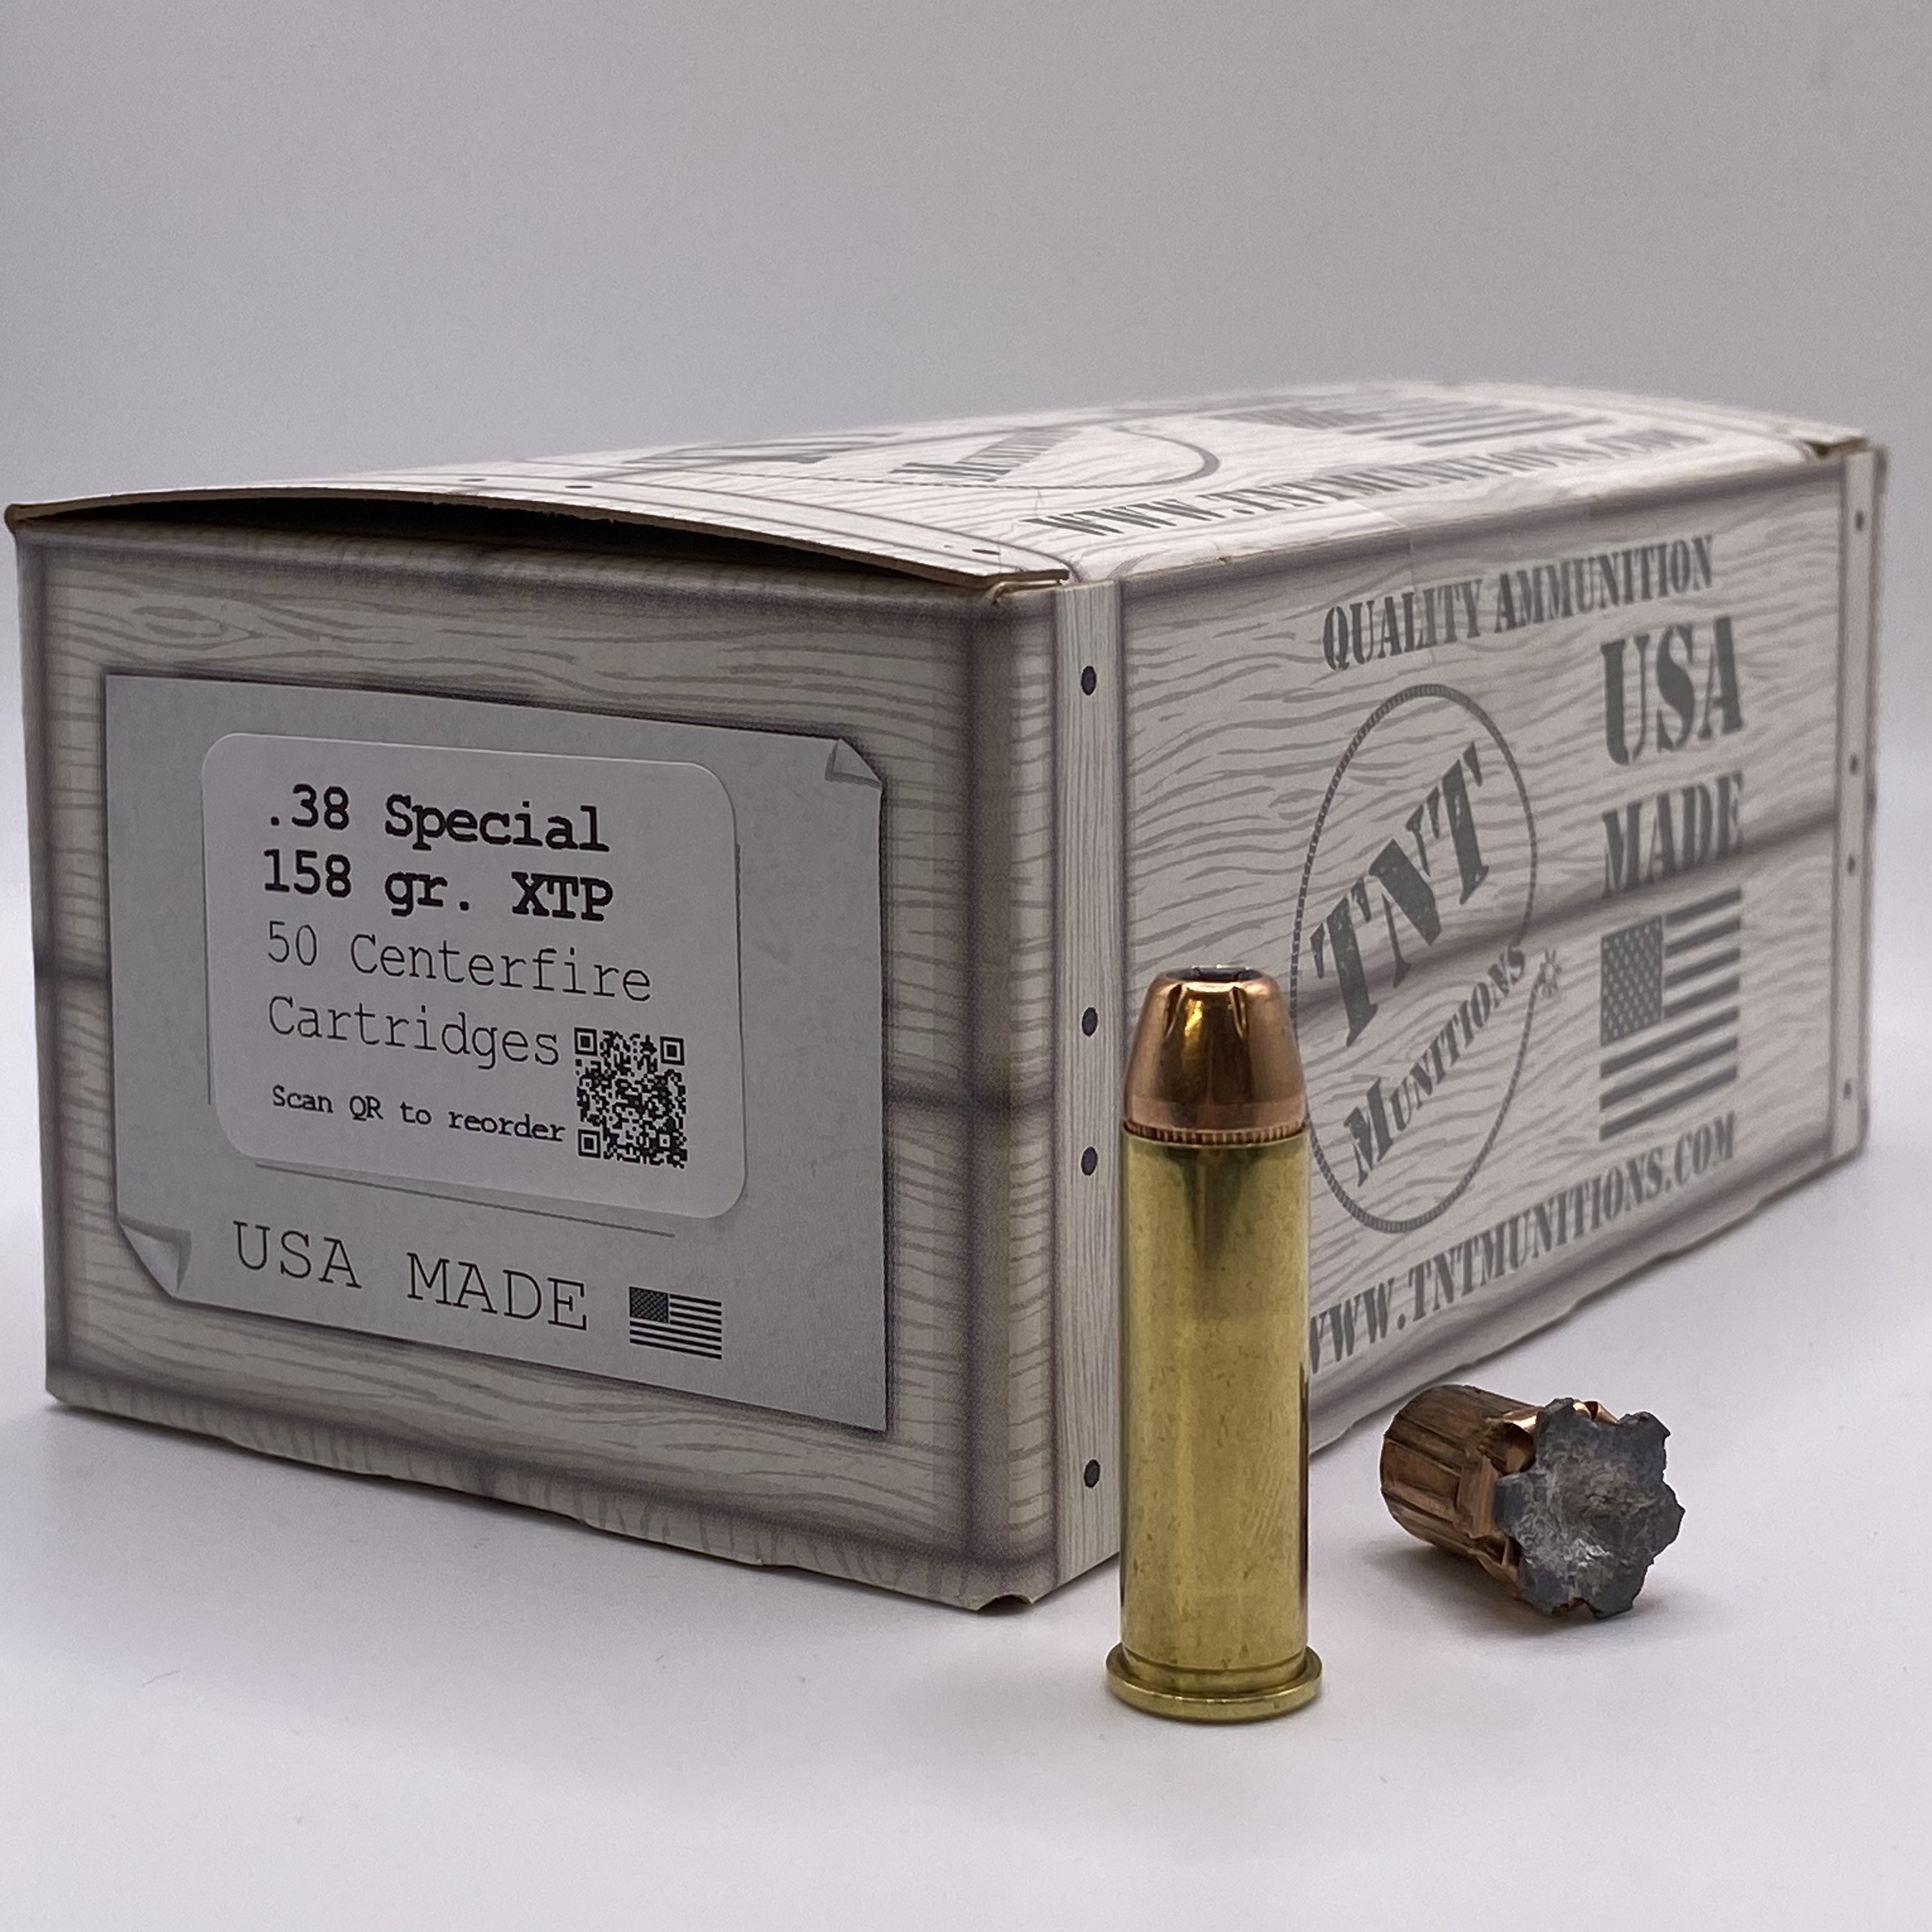 .38 Special 158 gr. XTP Defense. MEMORIAL DAY SALE! THROUGH MAY 29TH ONLY - SHIPS NBD